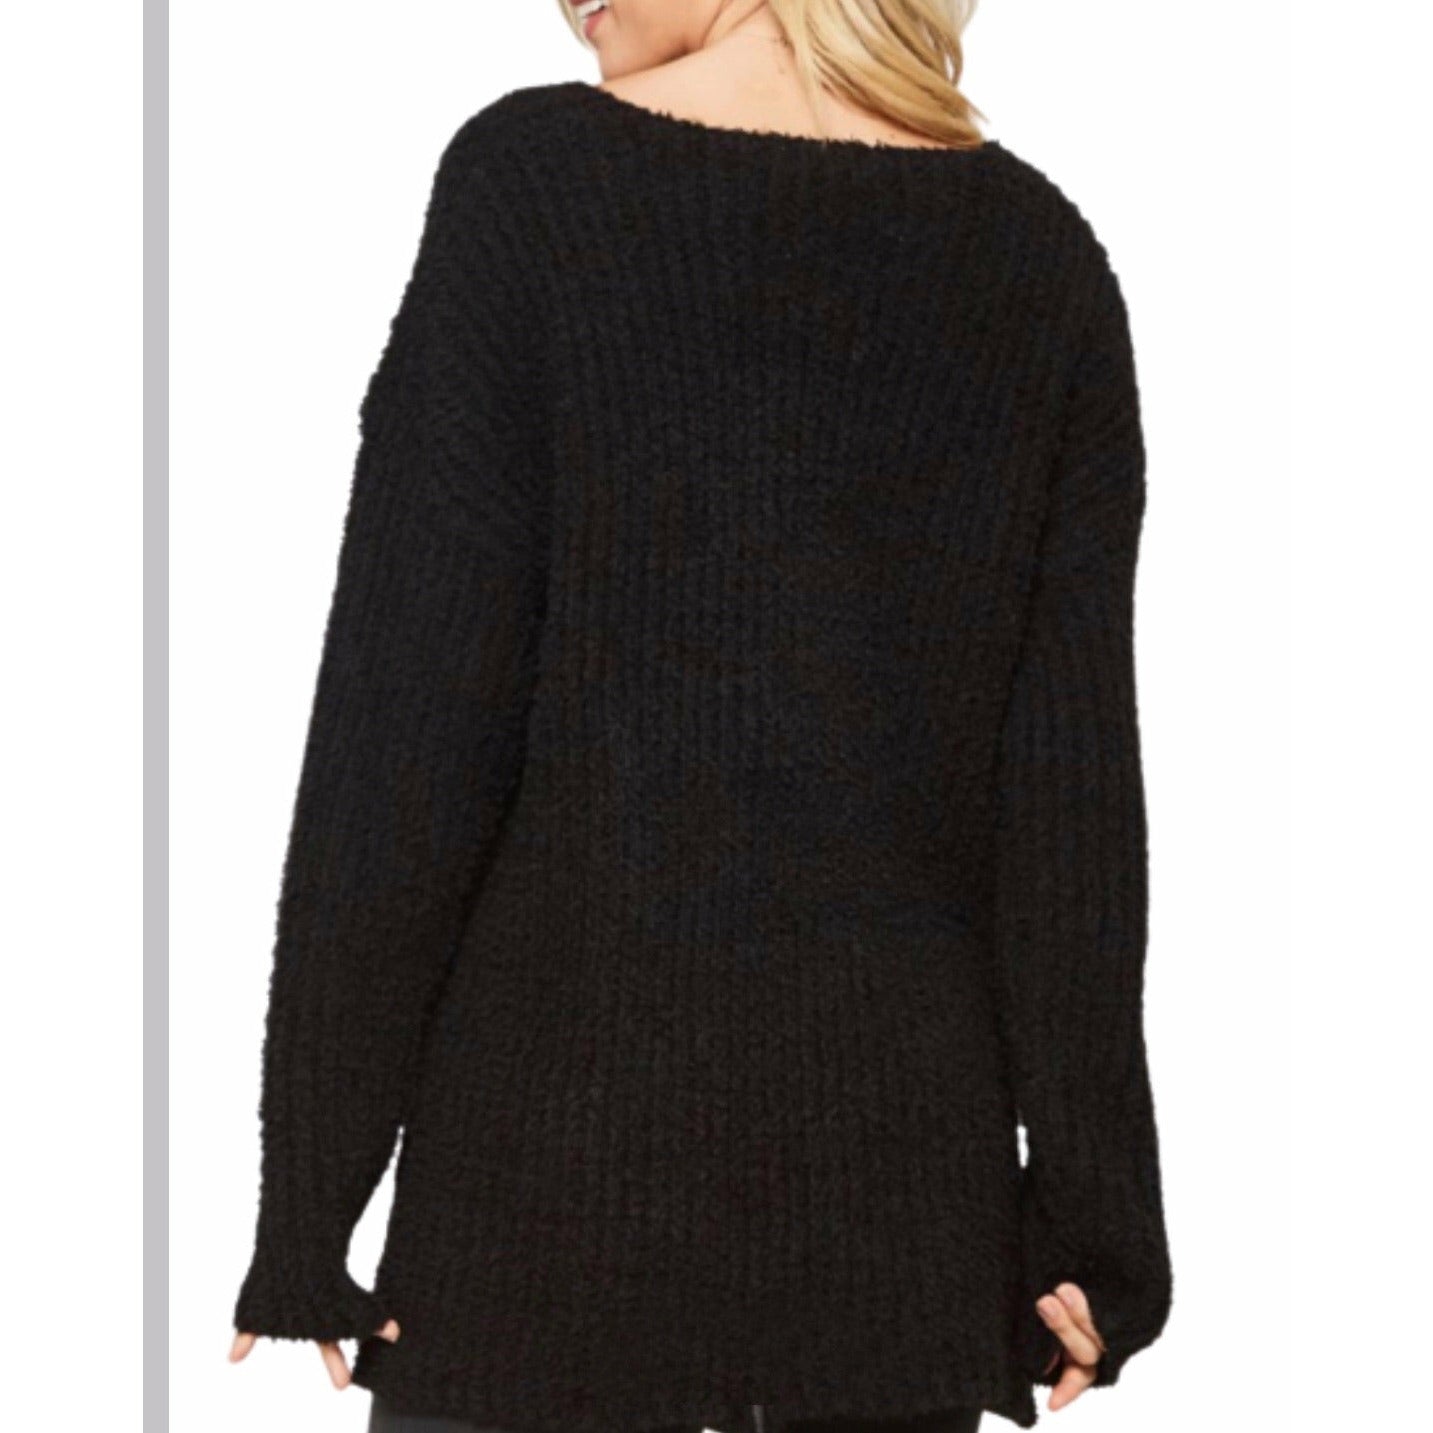 New ! Jet Setter Ribbed Knit Sweater In Black - Glamco Boutique 